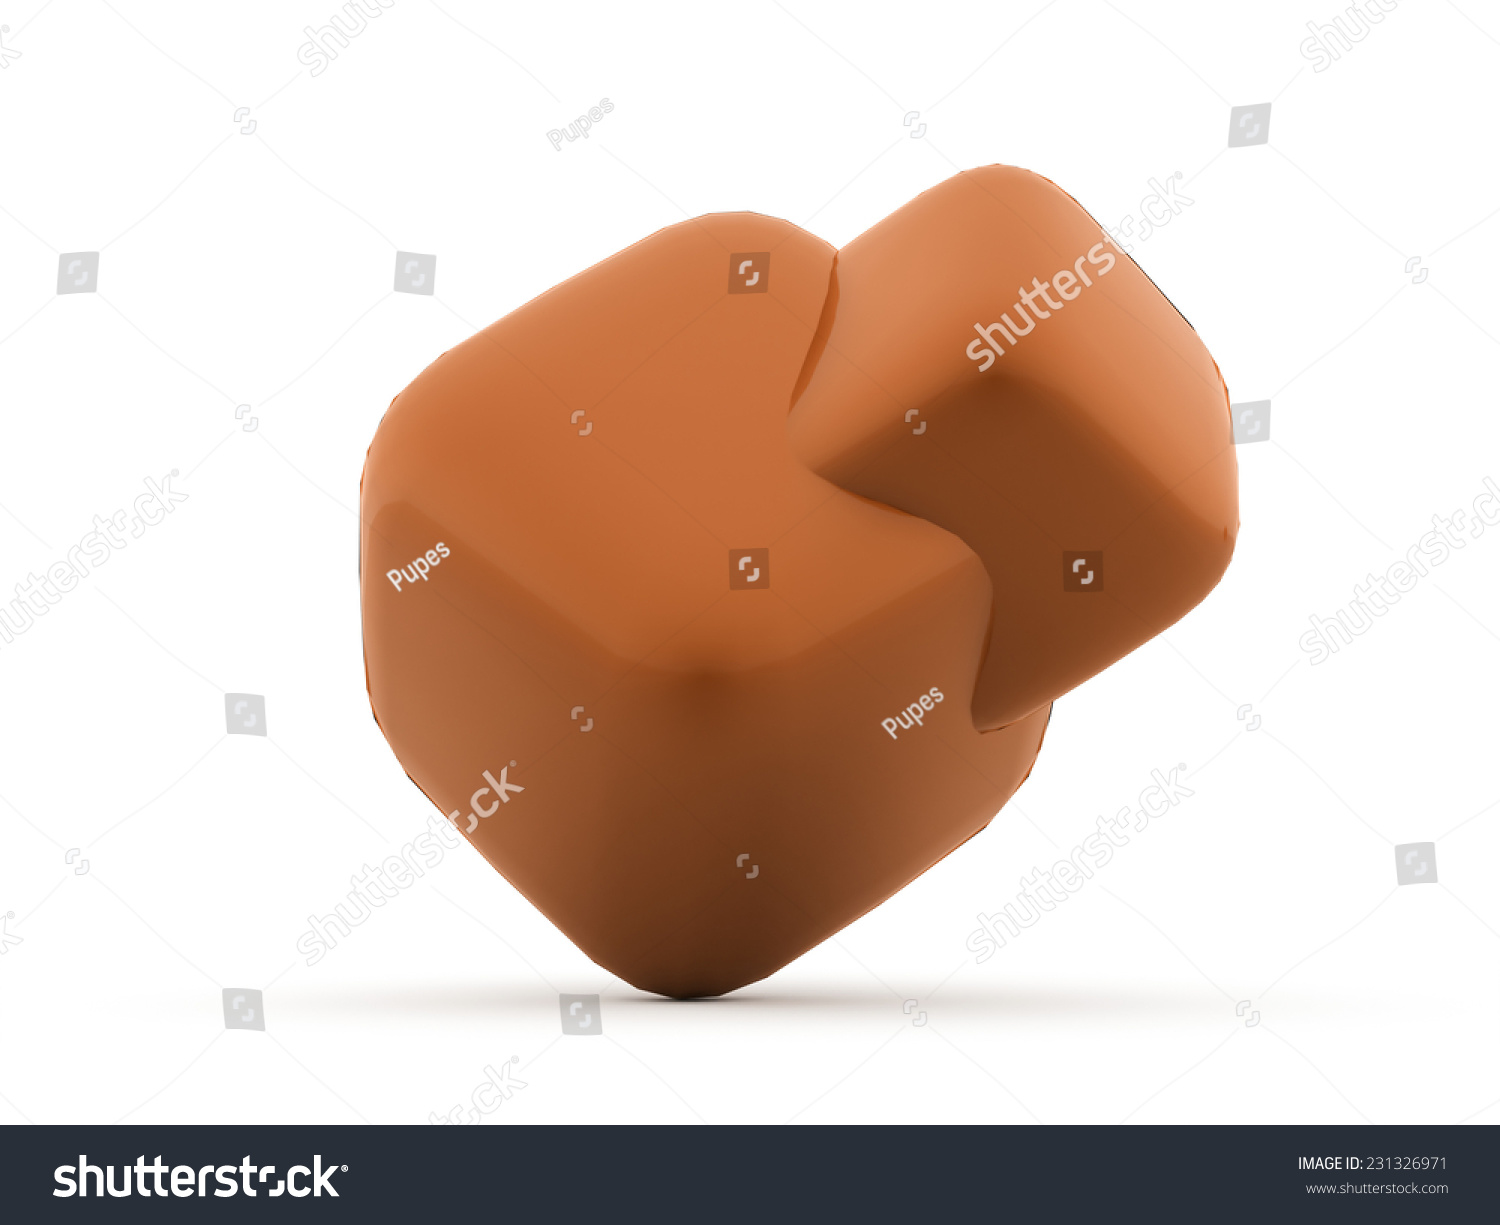 Orange cubes icon concept rendered on white background #231326971